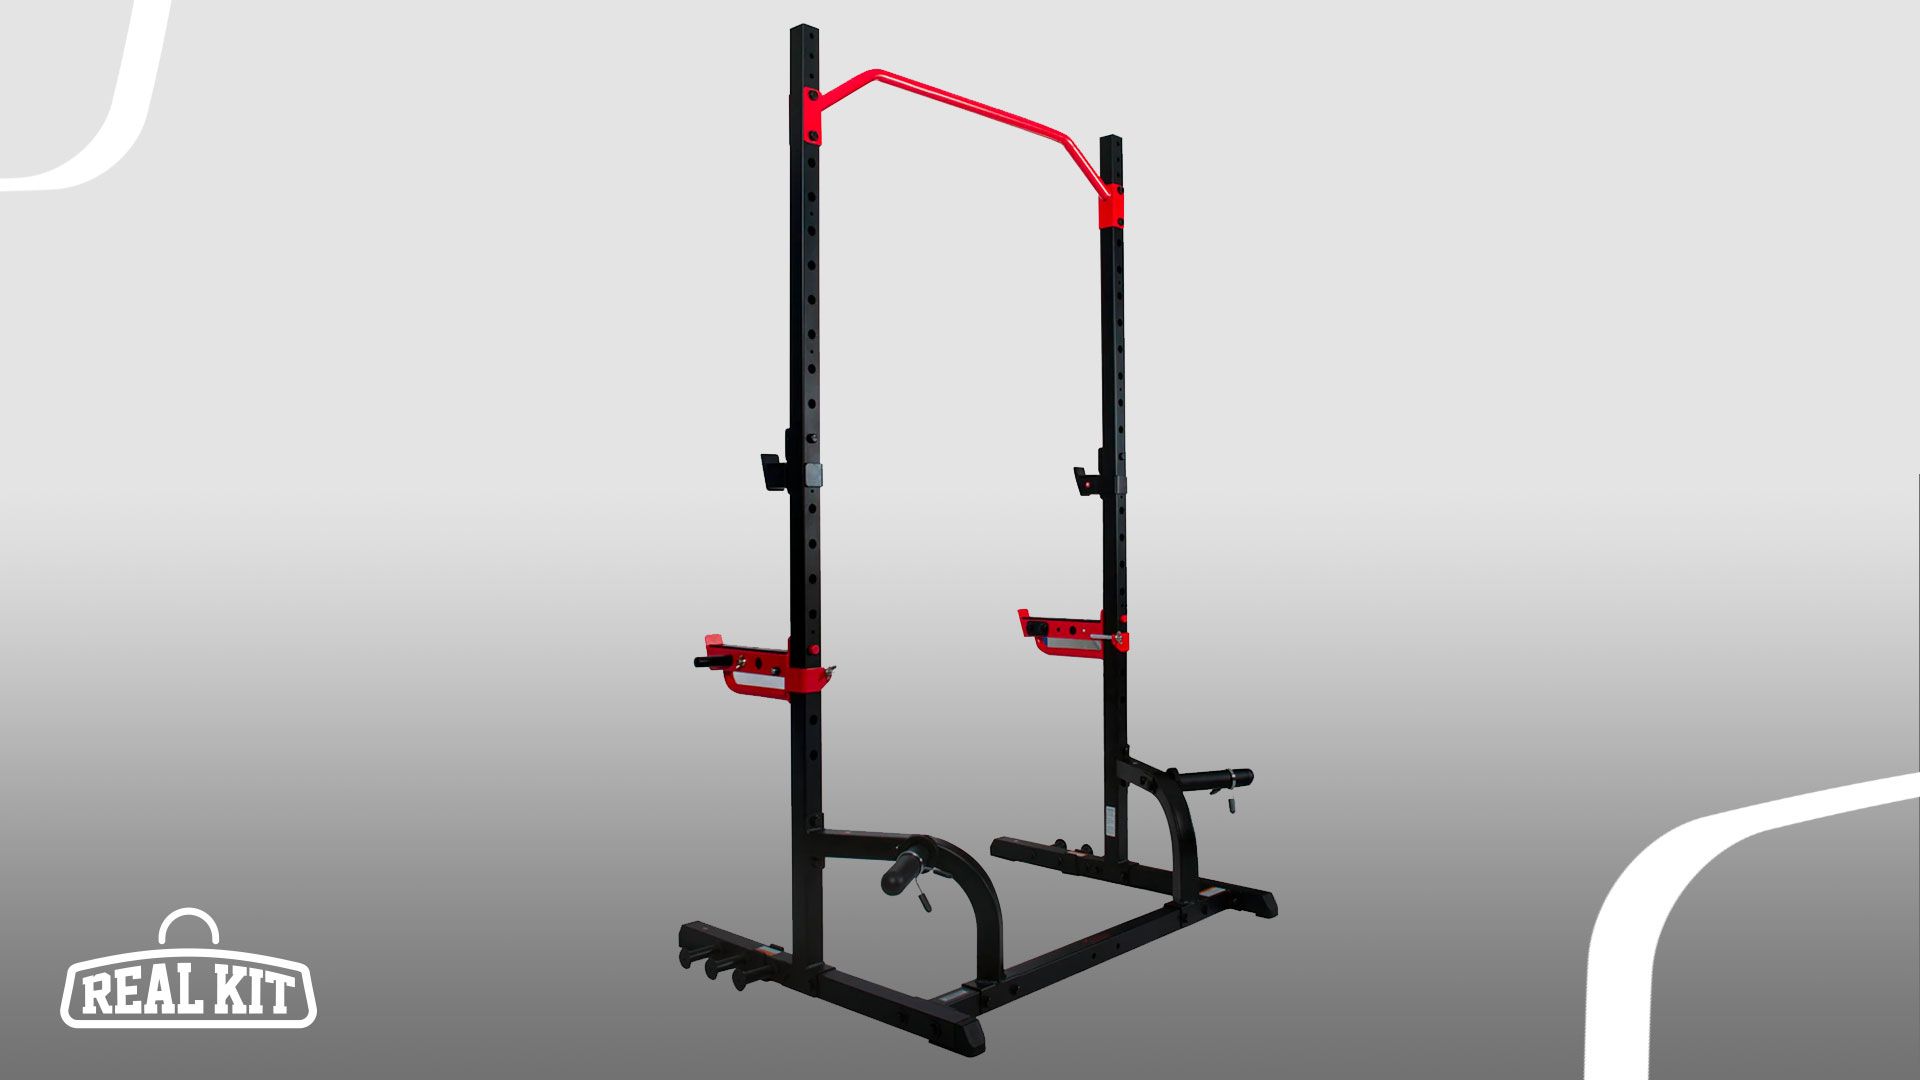 Power Stands Barbell Free Bench Press Weight Heavy Duty Dipping Station Weight Lifting Men Women Indoor Home Gym Fitness Yinguo Adjustable Olympic Squat Rack Dumbbell Storage Racks Max Load 551LBS 